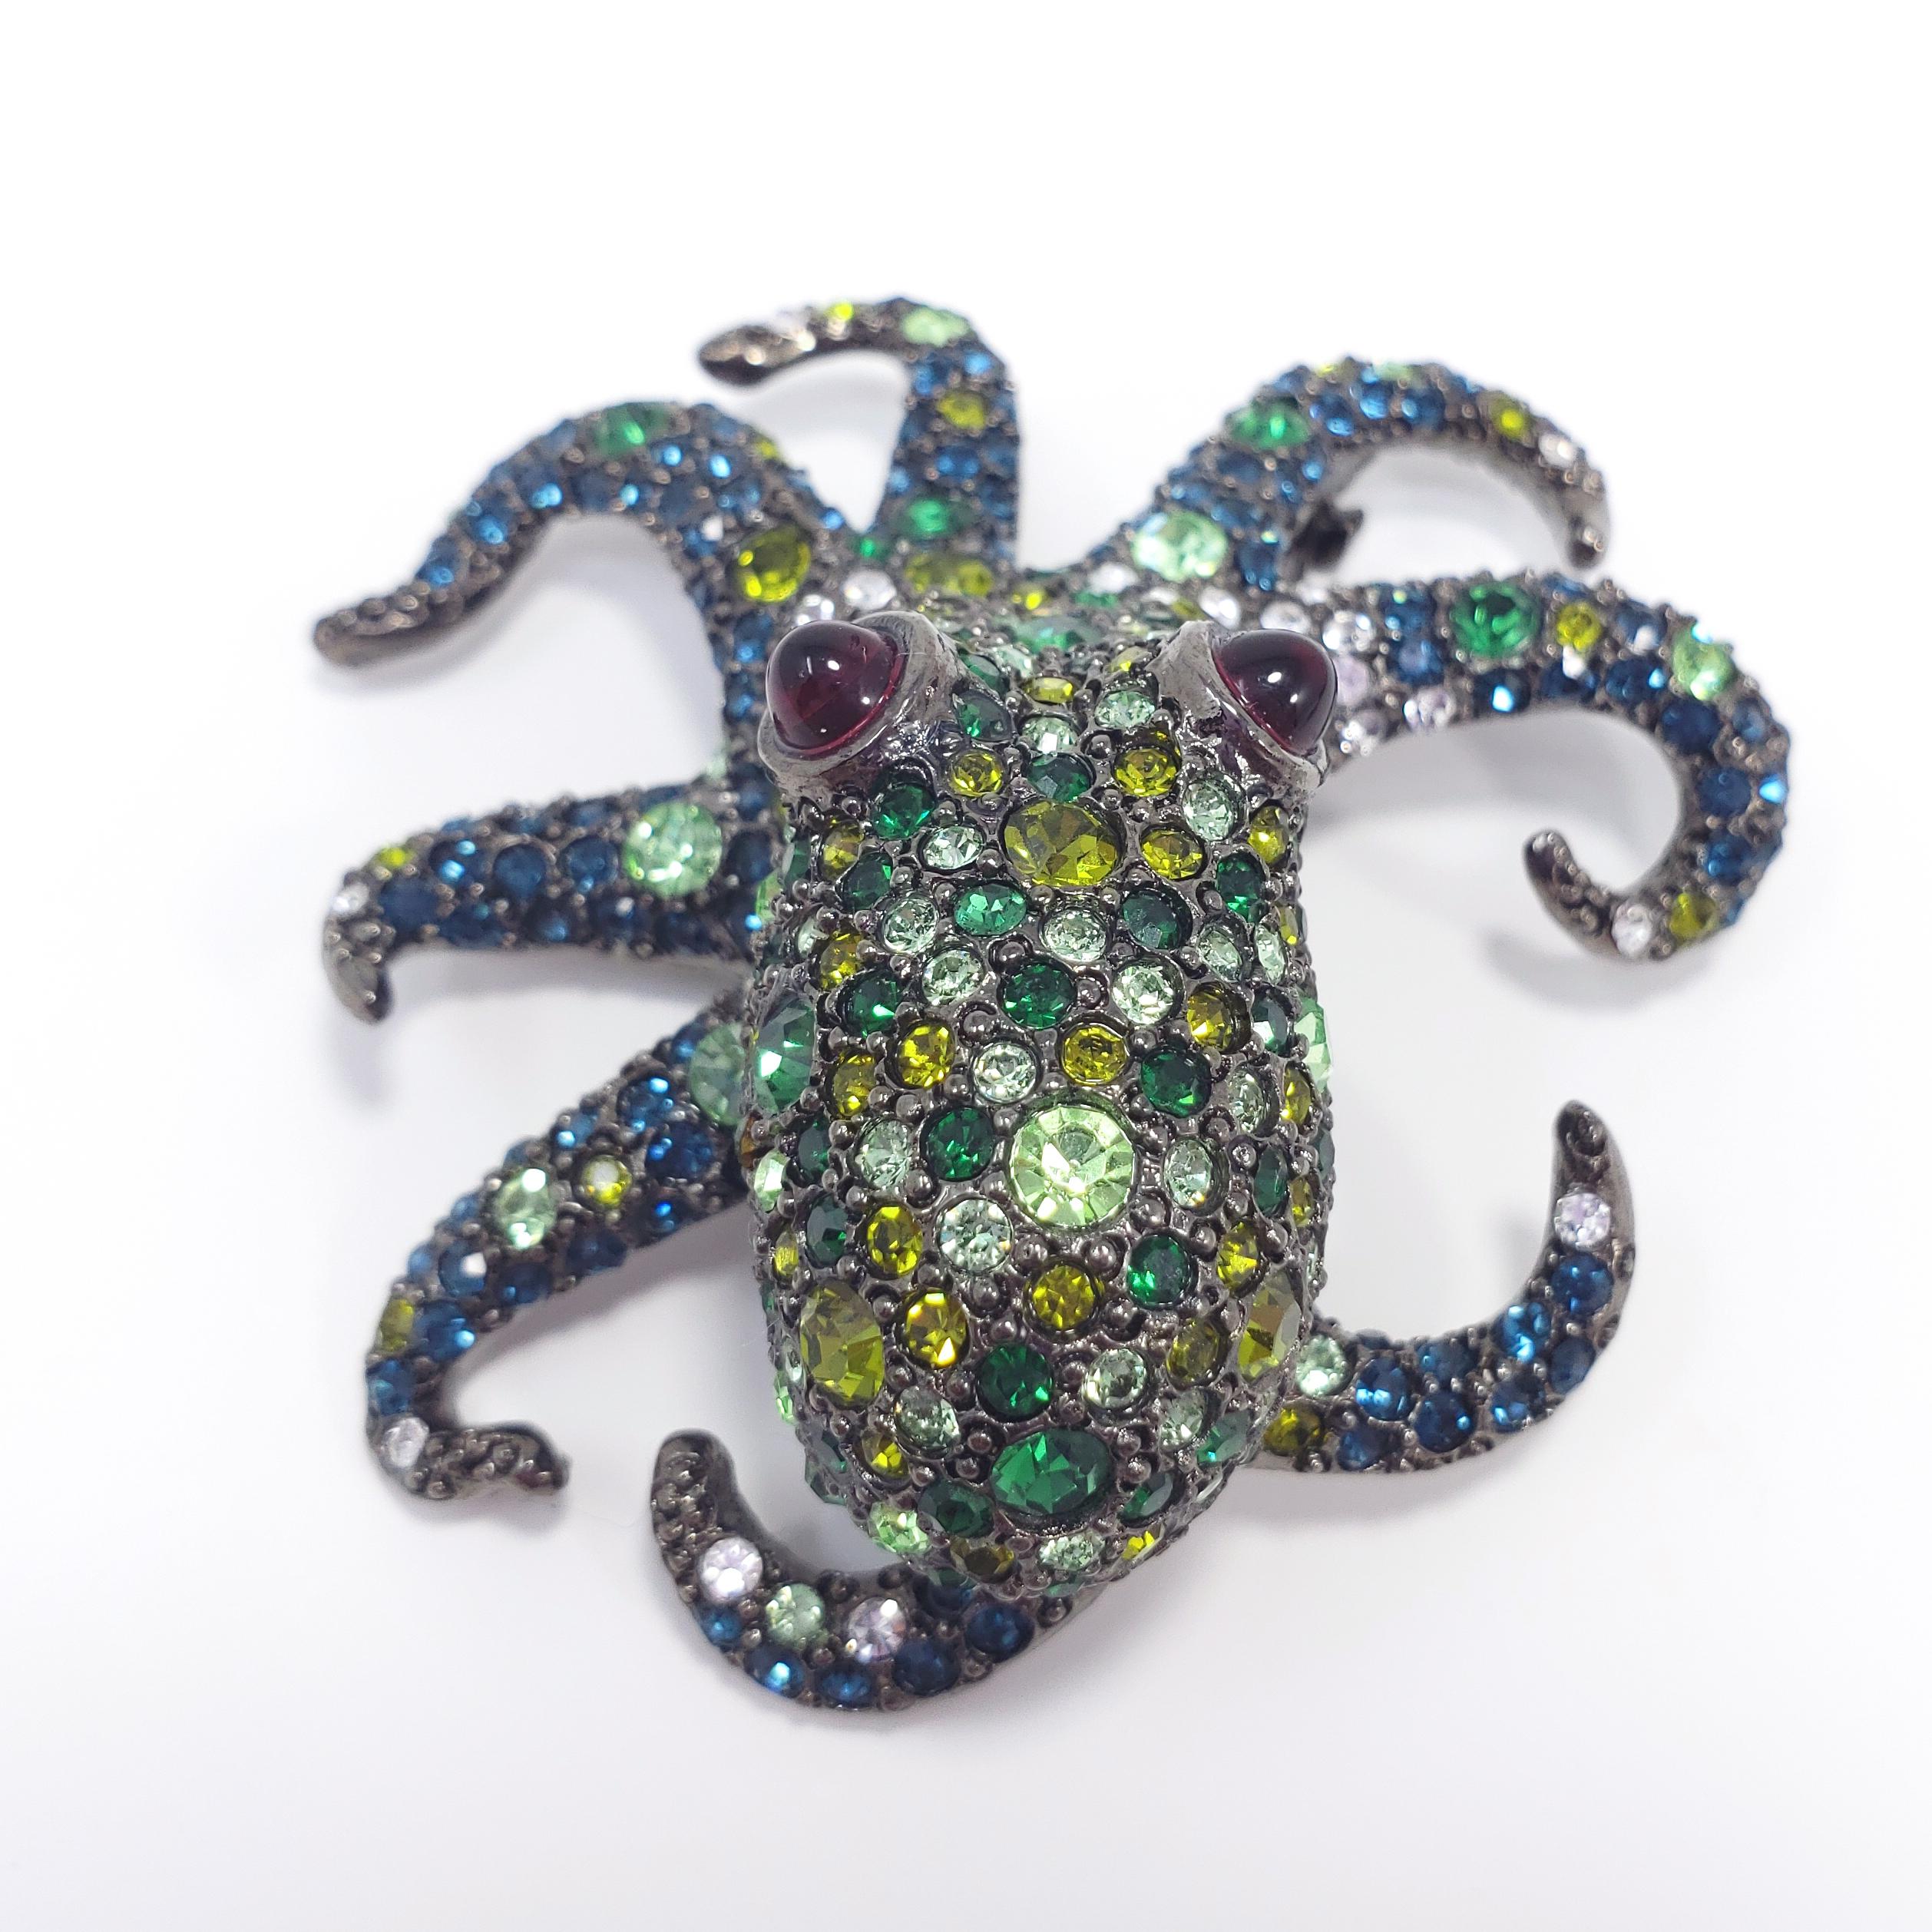 KJL Kenneth Jay Lane Pave Green and White Crystal Octopus Brooch 1